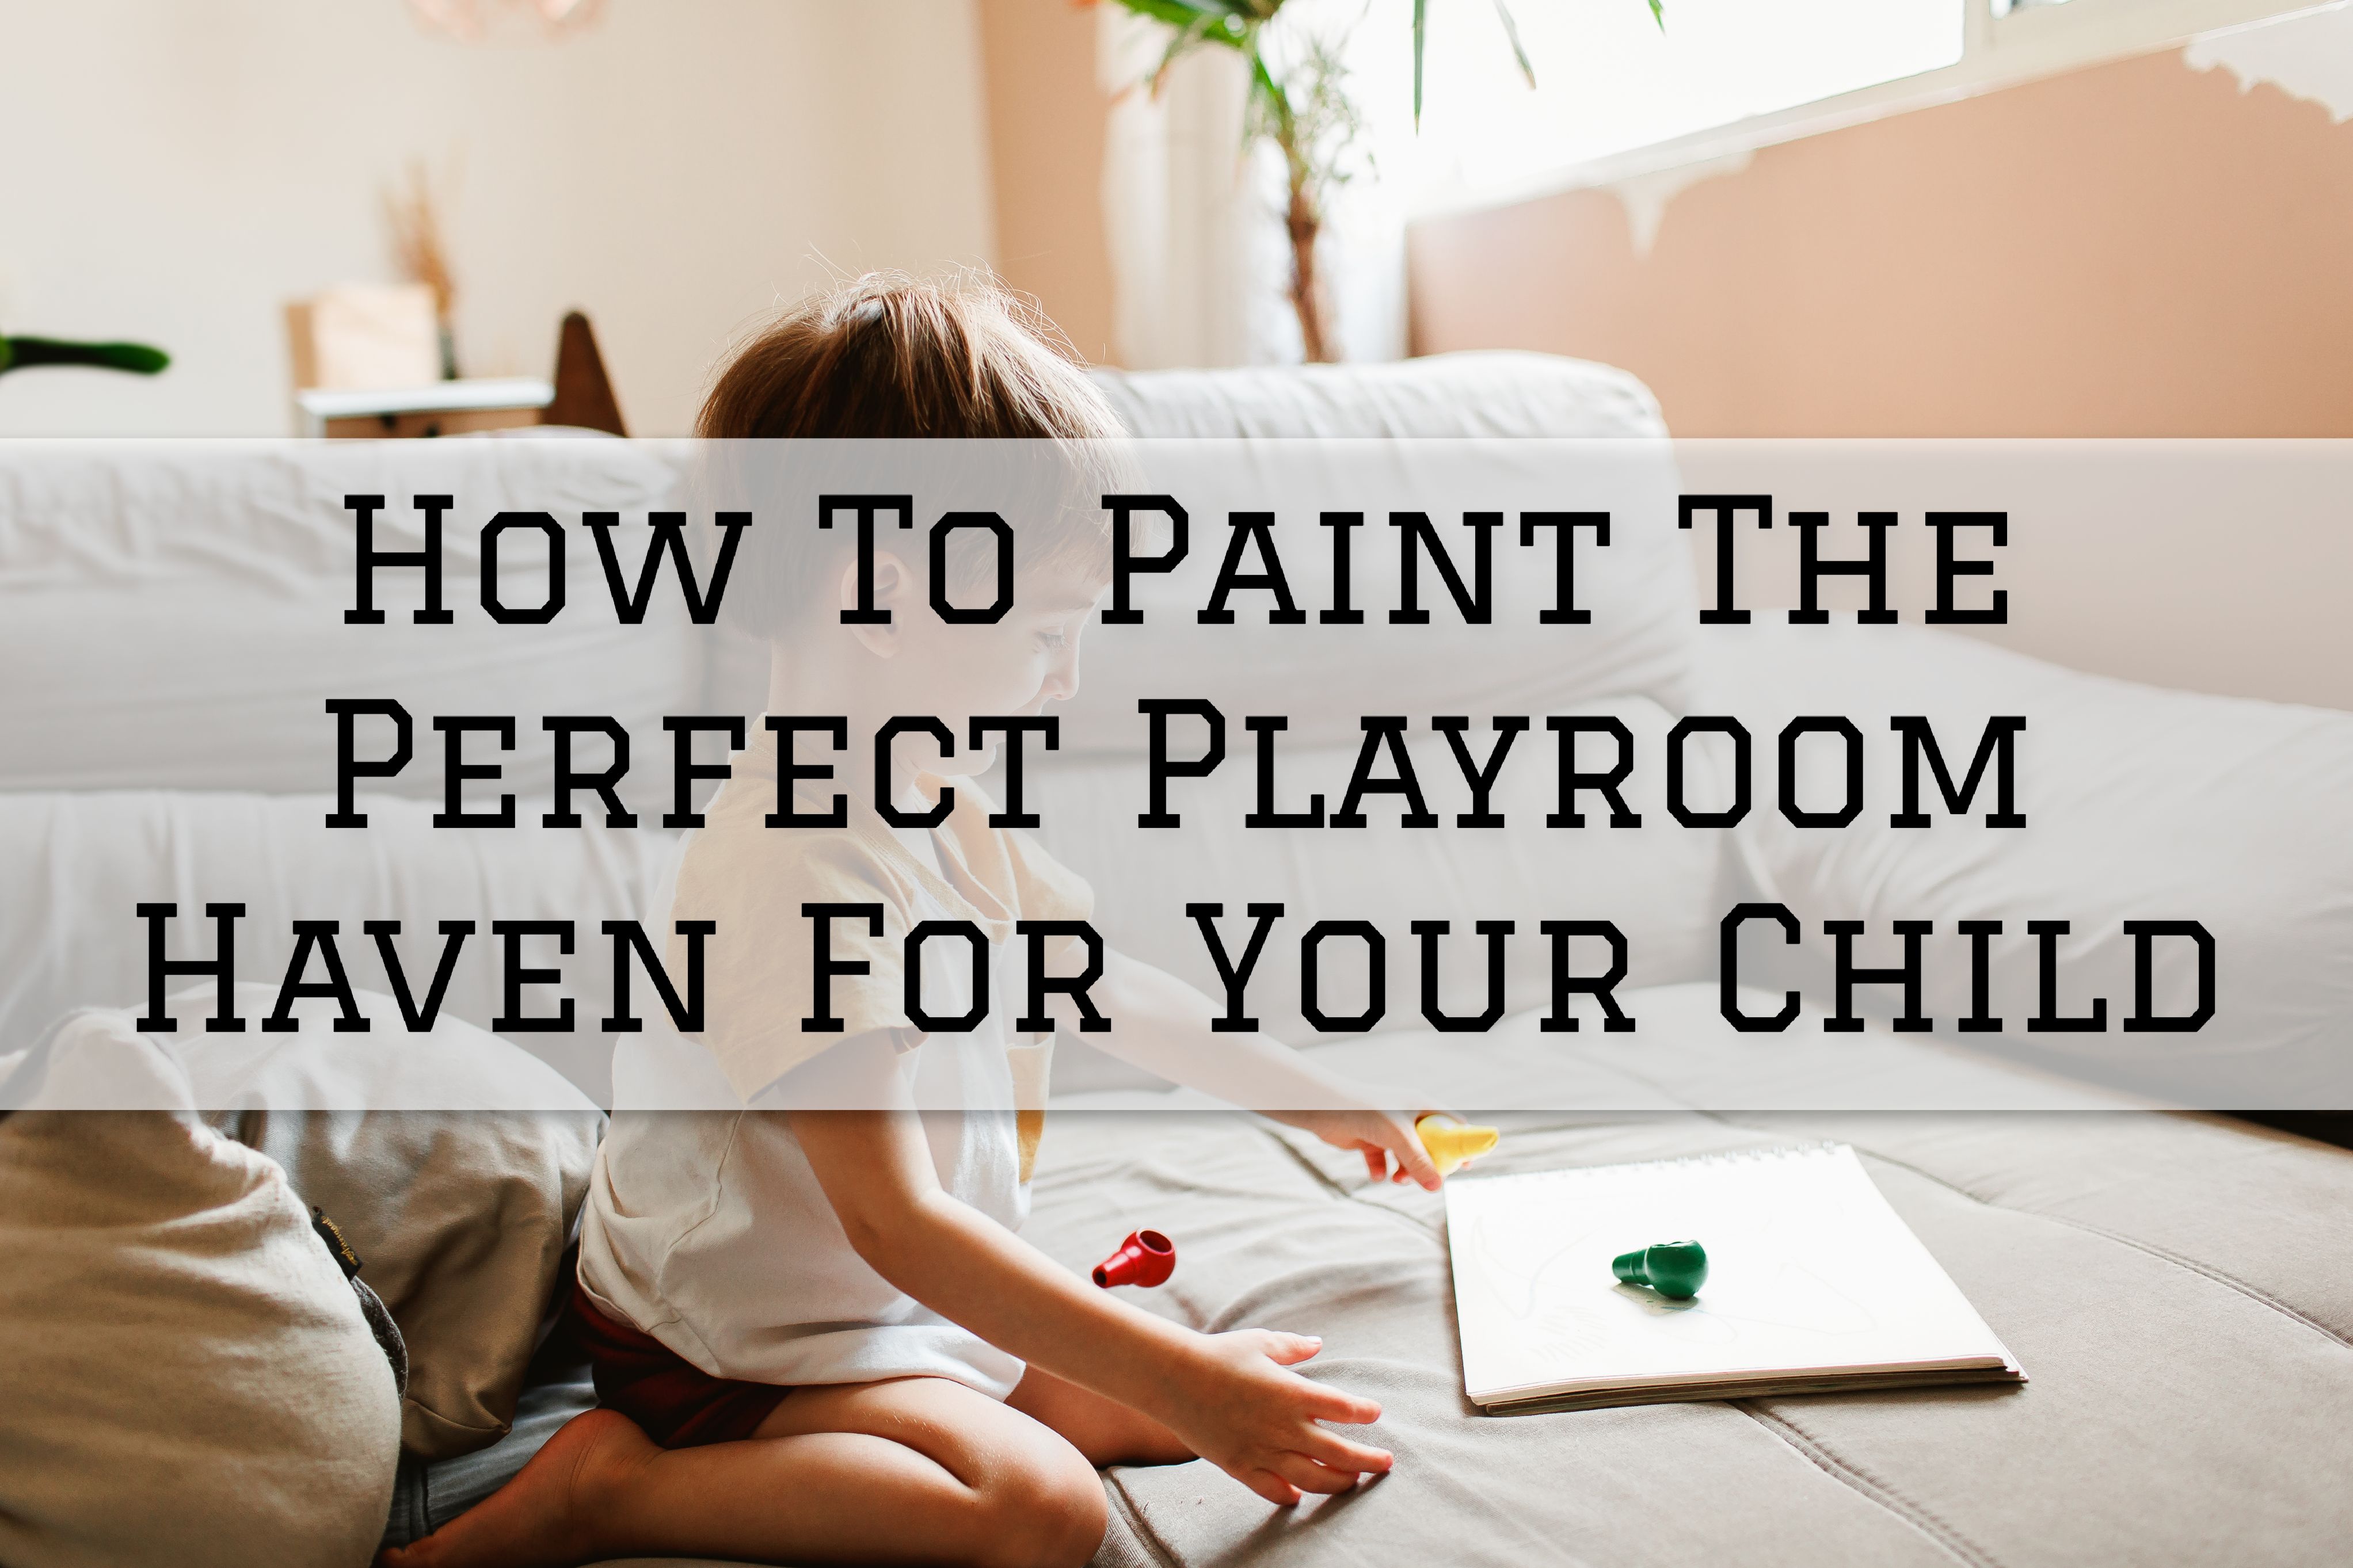 2022-05-22 The Painting and Wallcovering Co Haddonfield NJ How To Paint The Perfect Playroom Haven